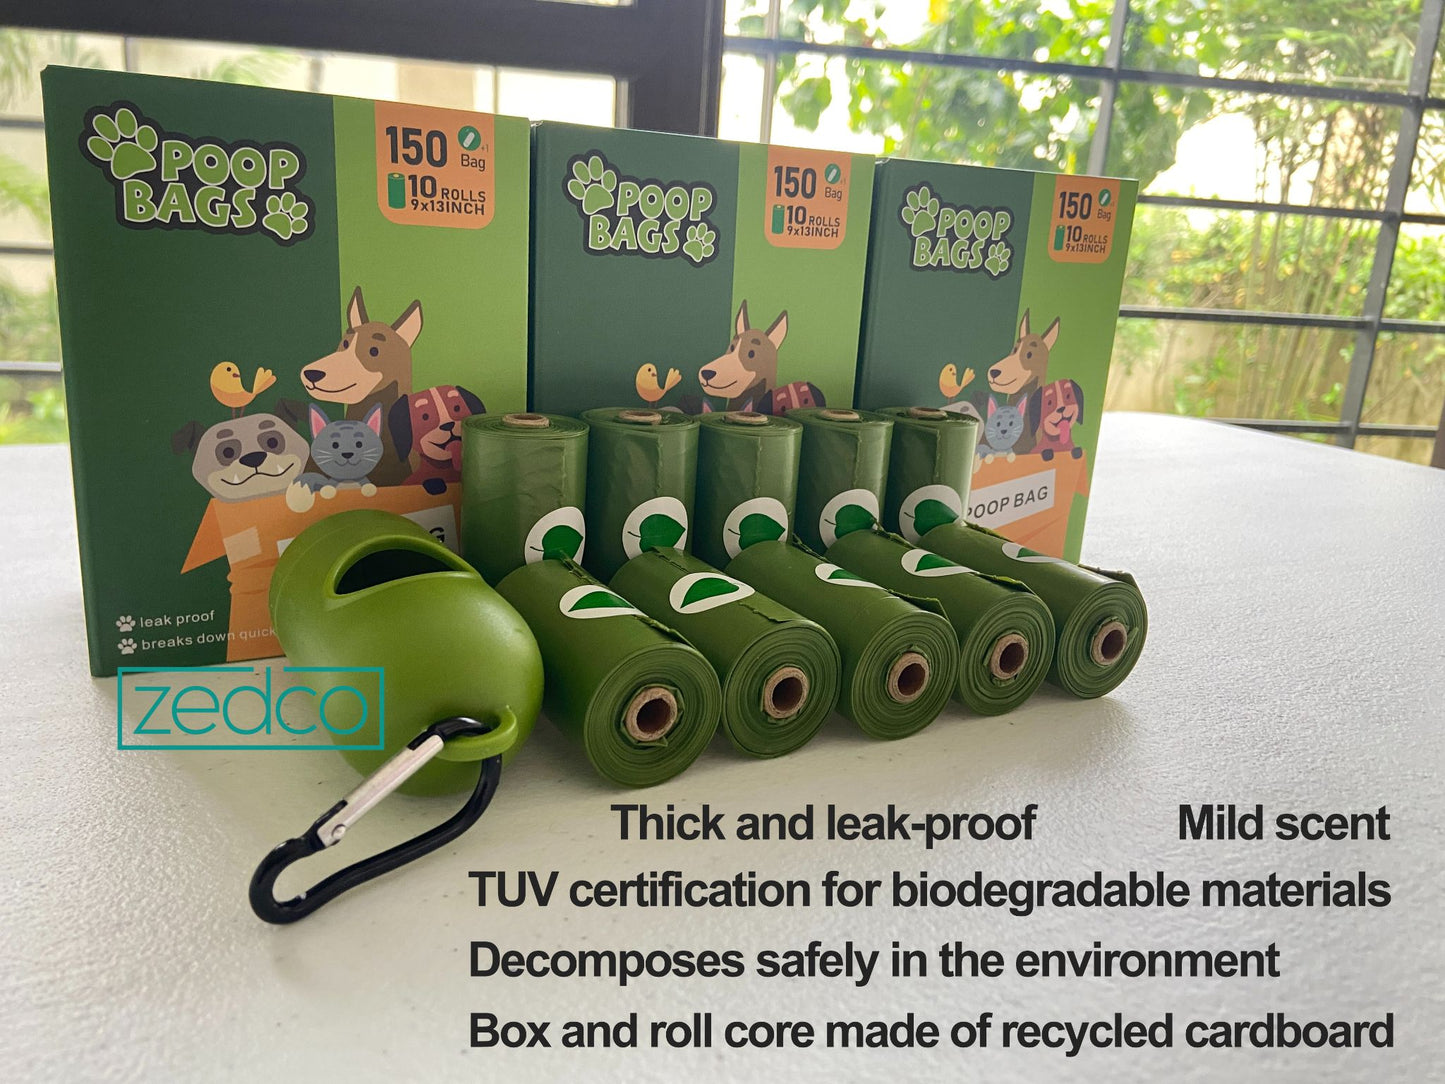 Pet Poop Bags - Biodegradable, Thick and Leak Proof, For Cat or Dog Poop, Mild Scent